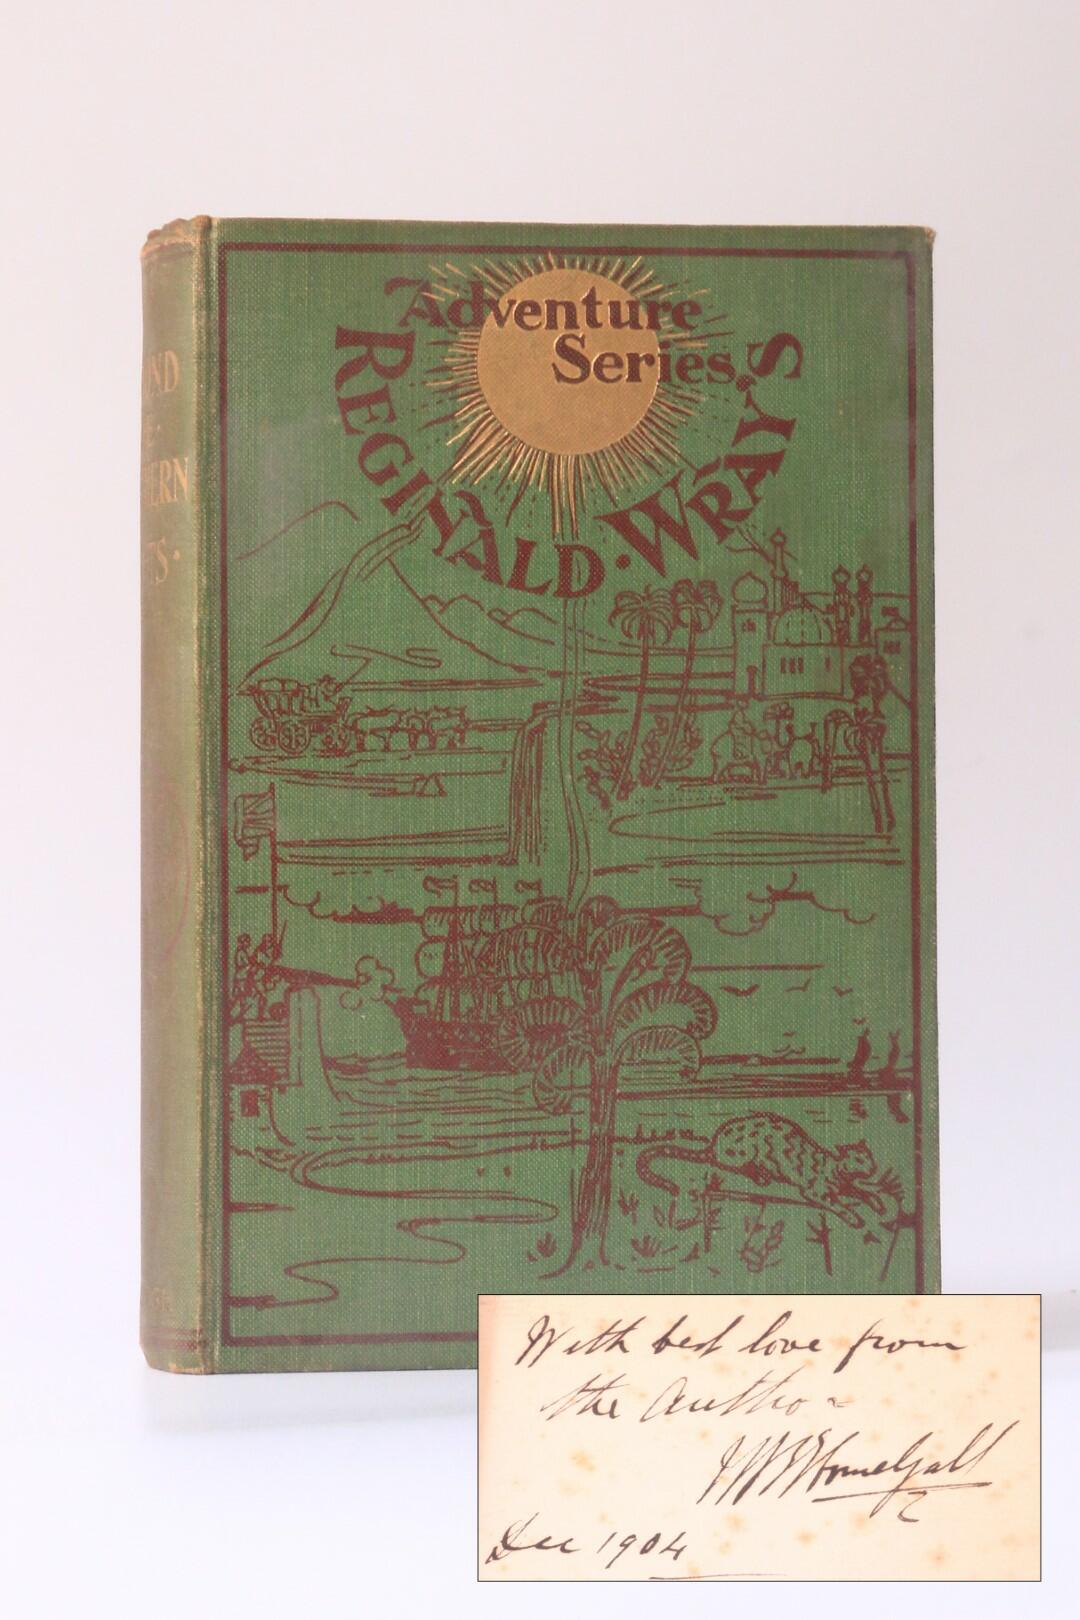 Reginald Wray [William Home-Gall] - Beyond the Northern Lights: A Tale of Strange Adventure in Unknown Seas - Thomas Burleigh, 1903, Signed First Edition.